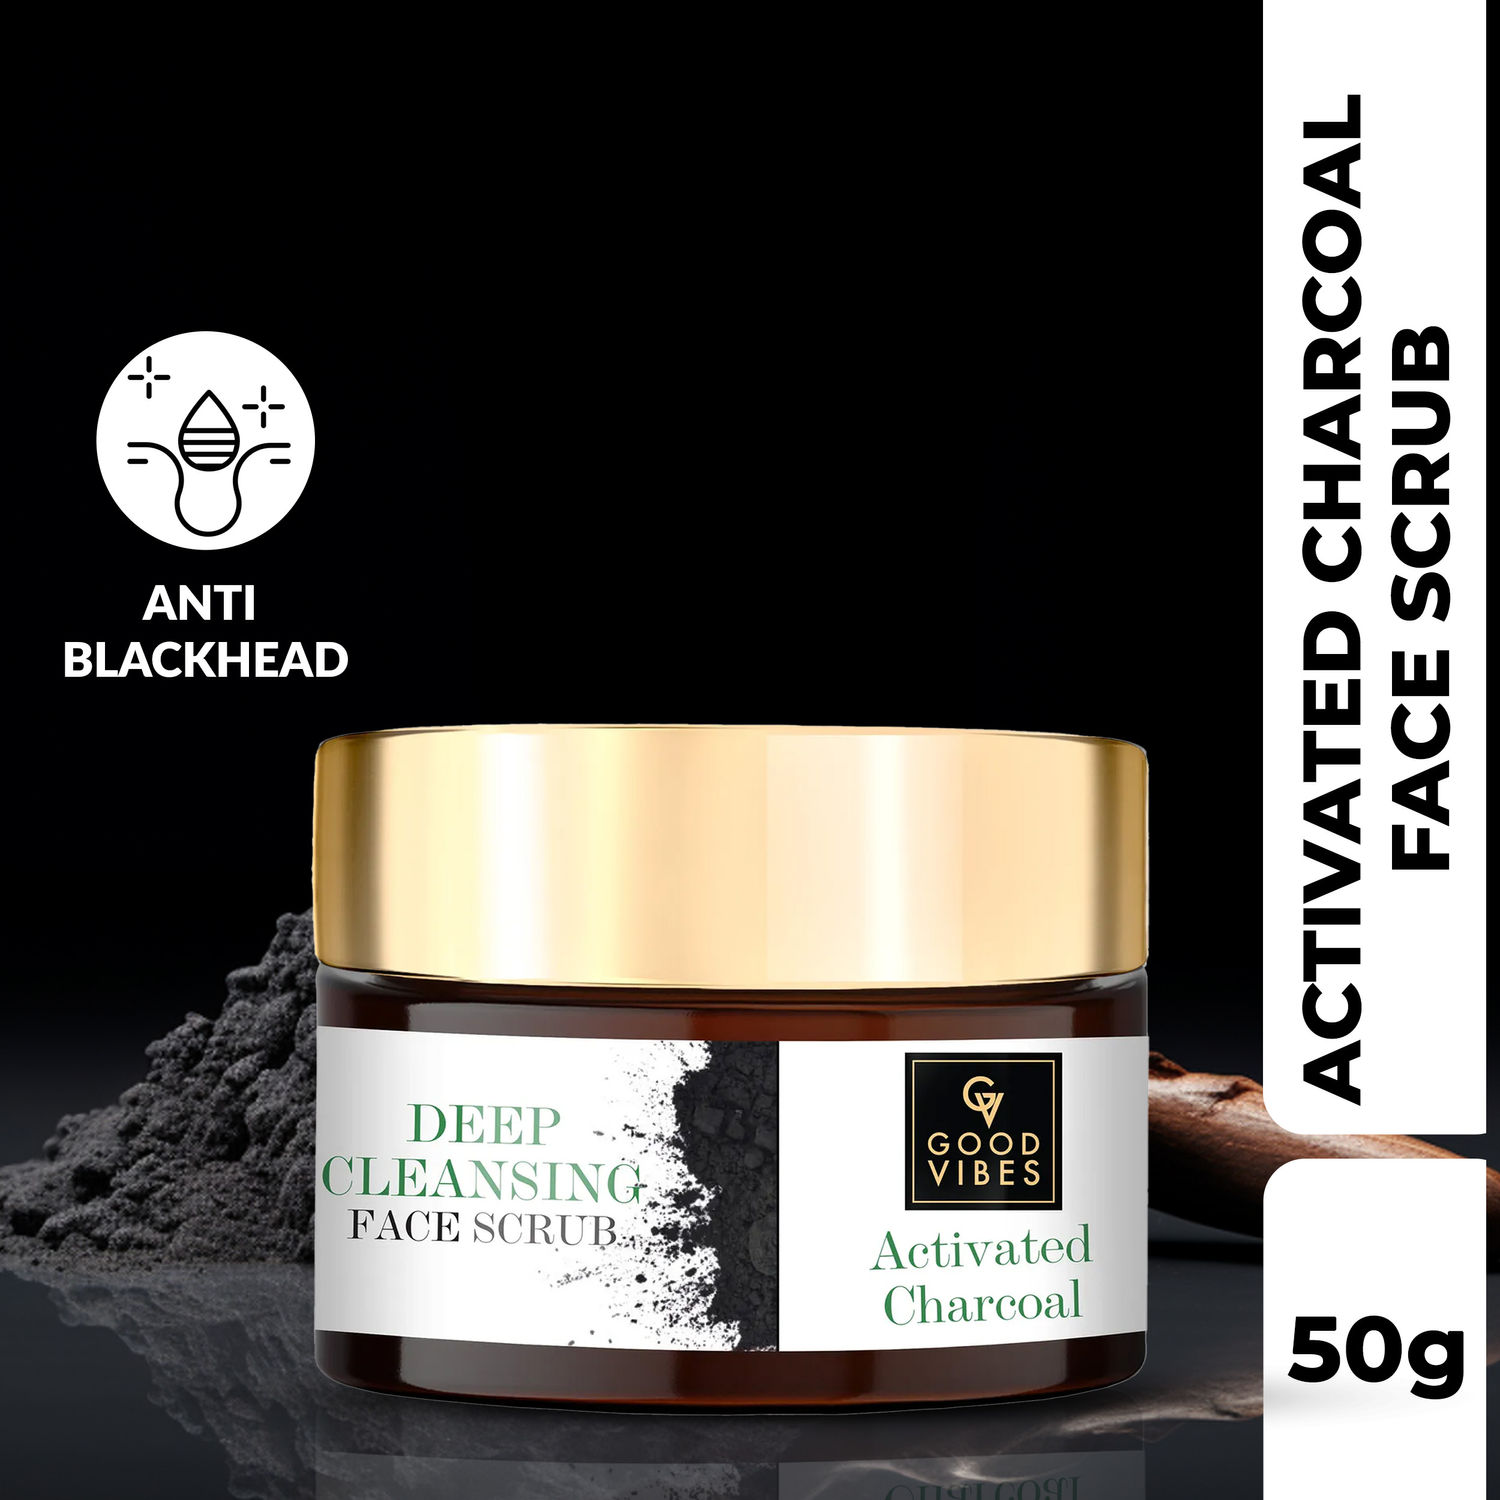 Buy Good Vibes Activated Charcoal Deep Cleansing Face Scrub | Anti-Acne, Blackhead | With Almond Oil | No Parabens, No Sulphates, No Mineral Oil (50 g) - Purplle